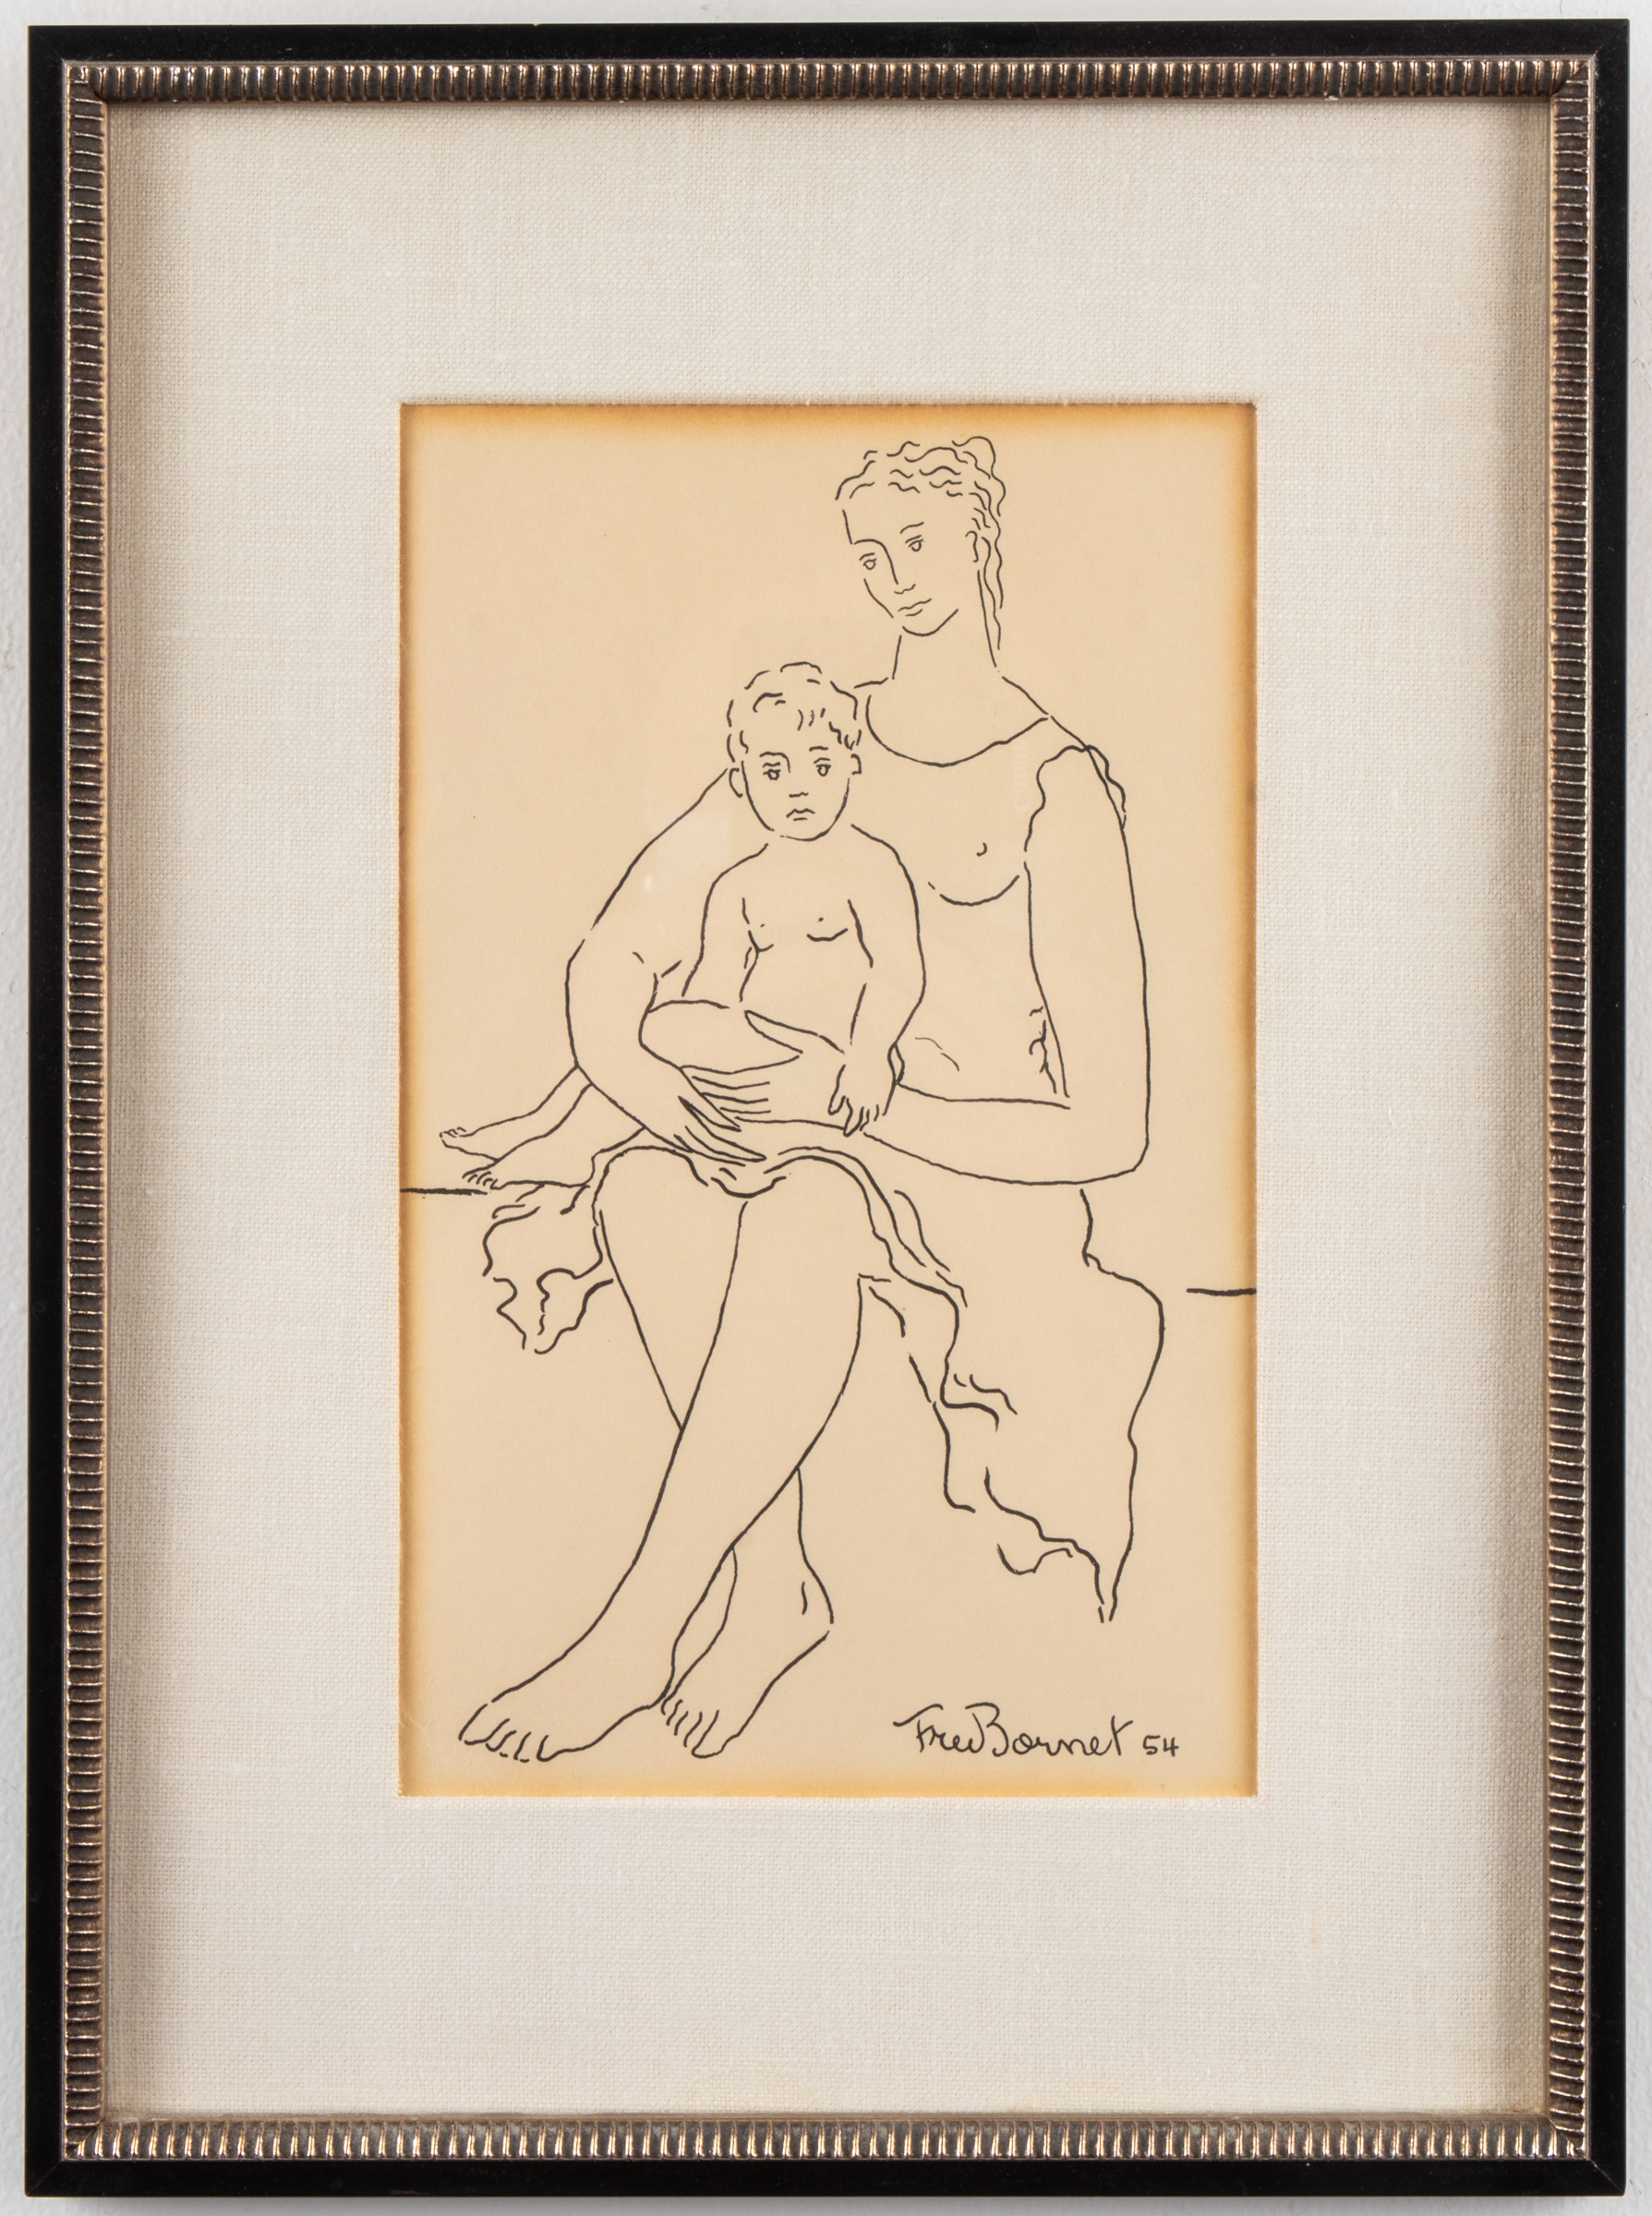 FRED BORNET "MOTHER AND CHILD"